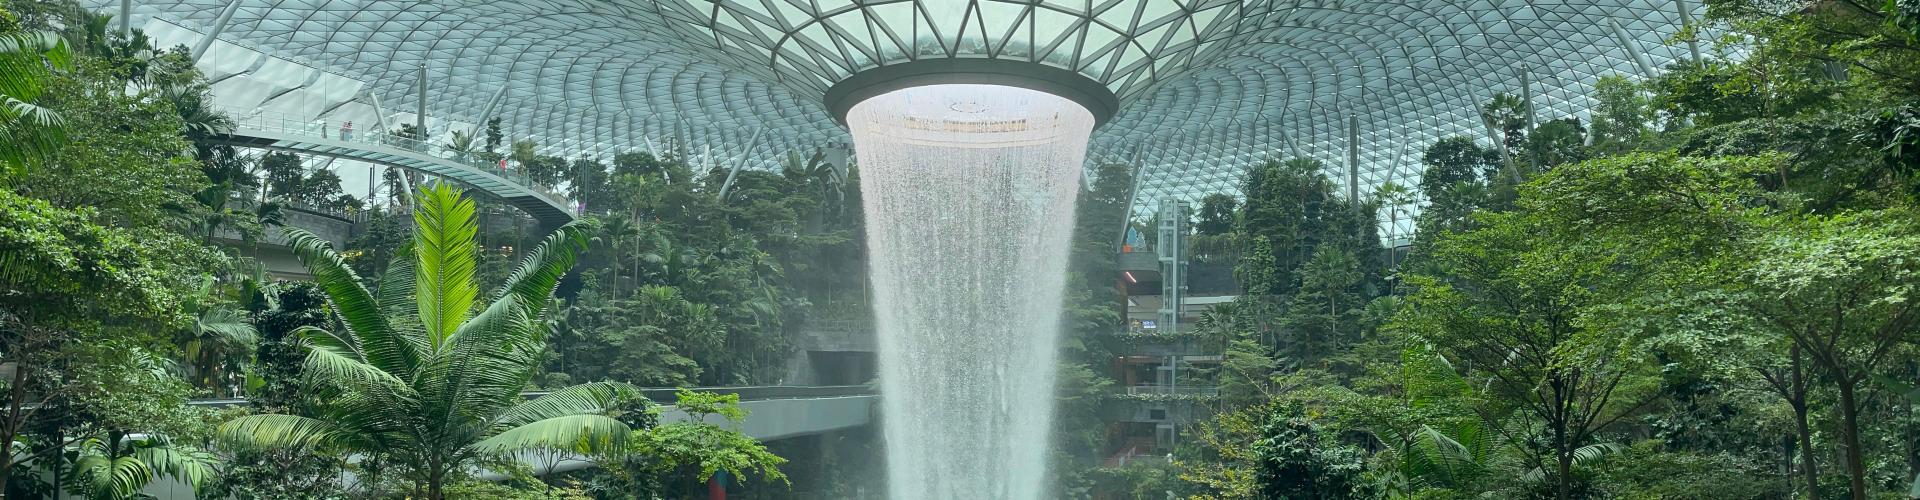 Pioneering A Greener Urban Environment In Singapore background